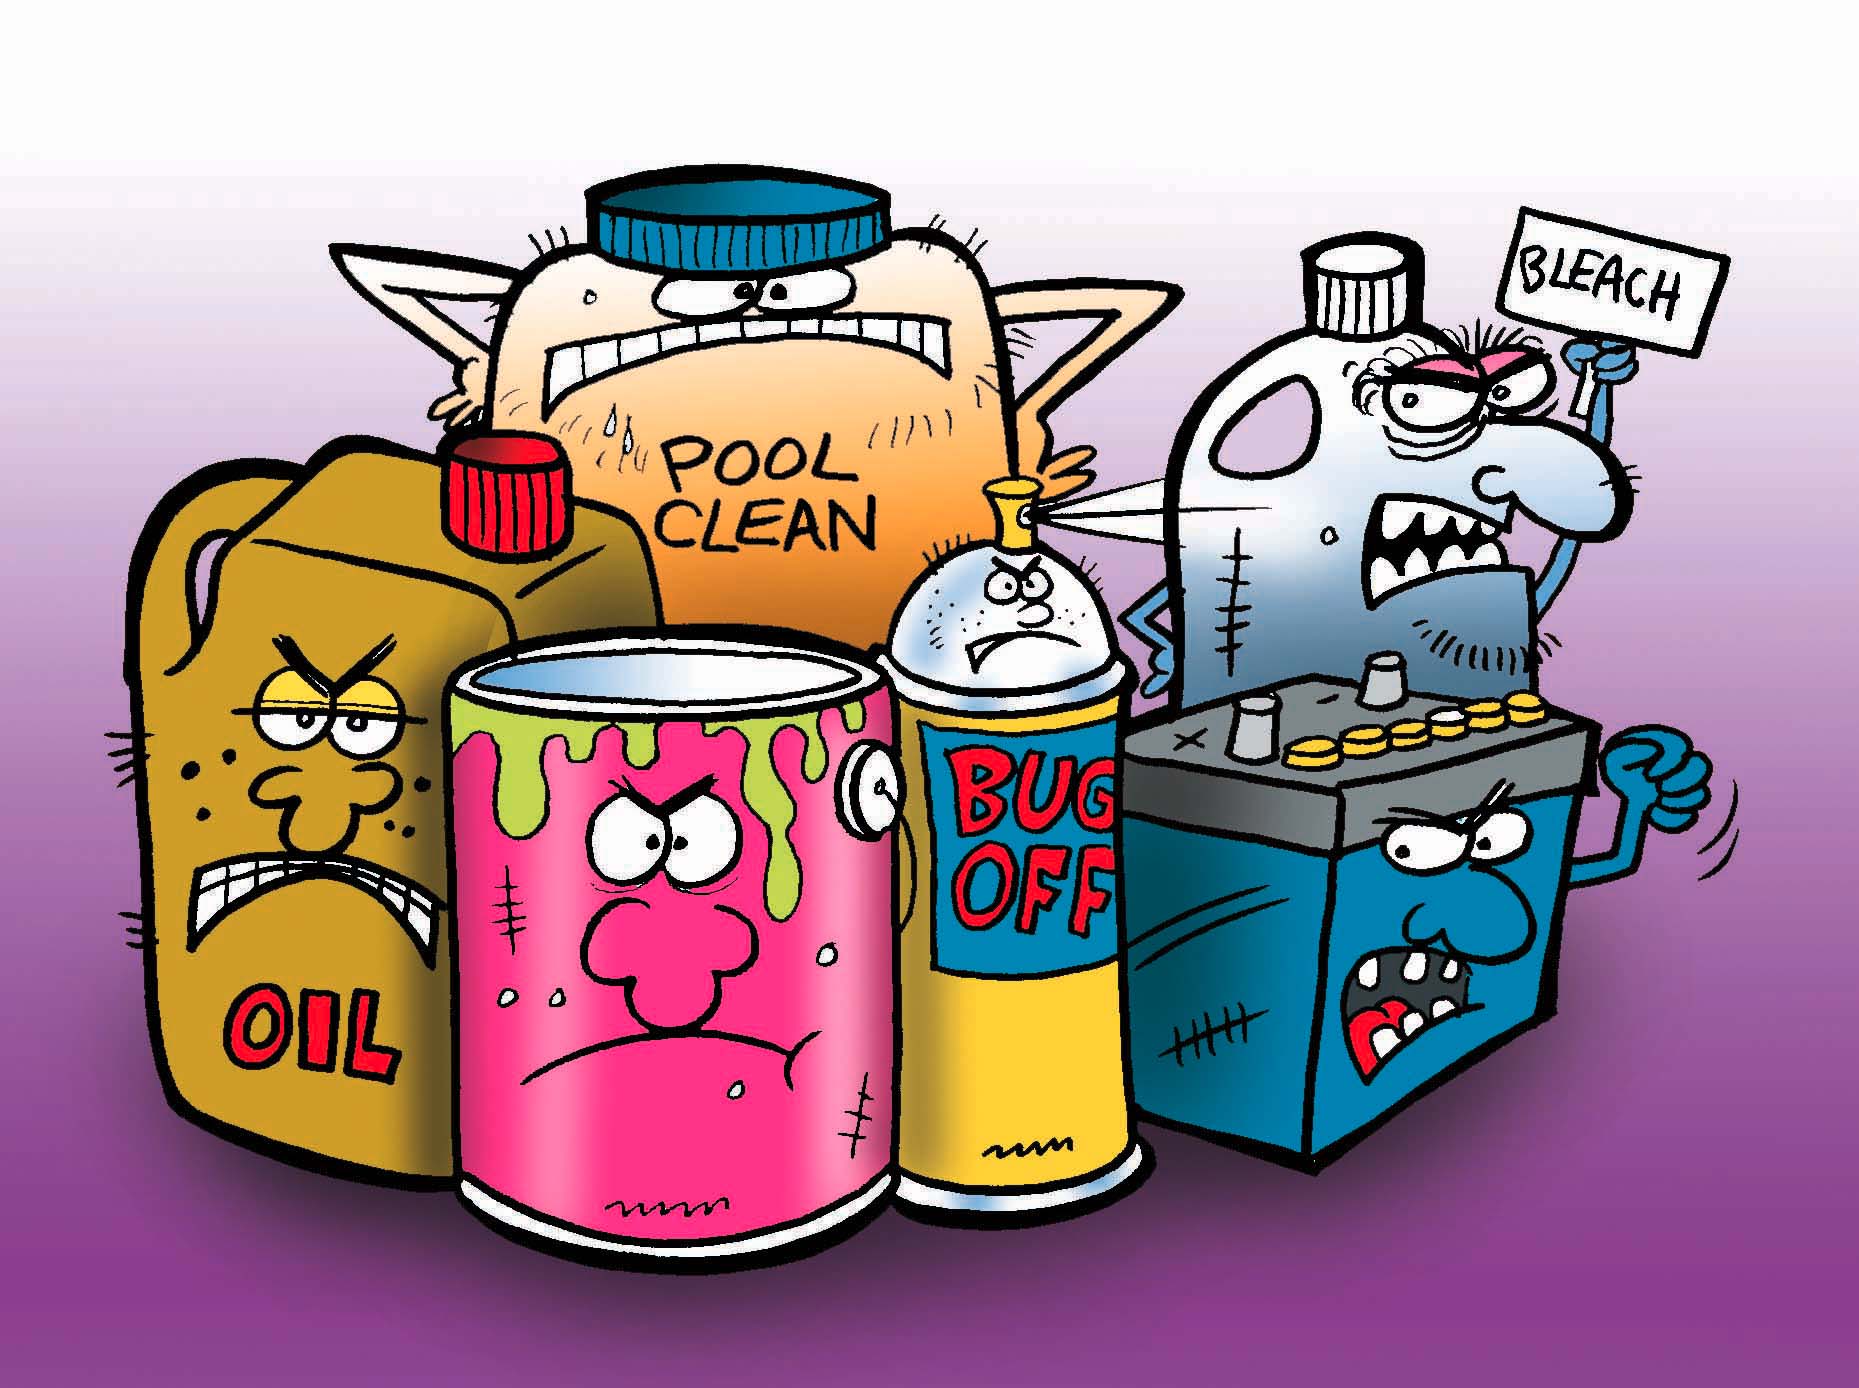 gas clipart harmful material